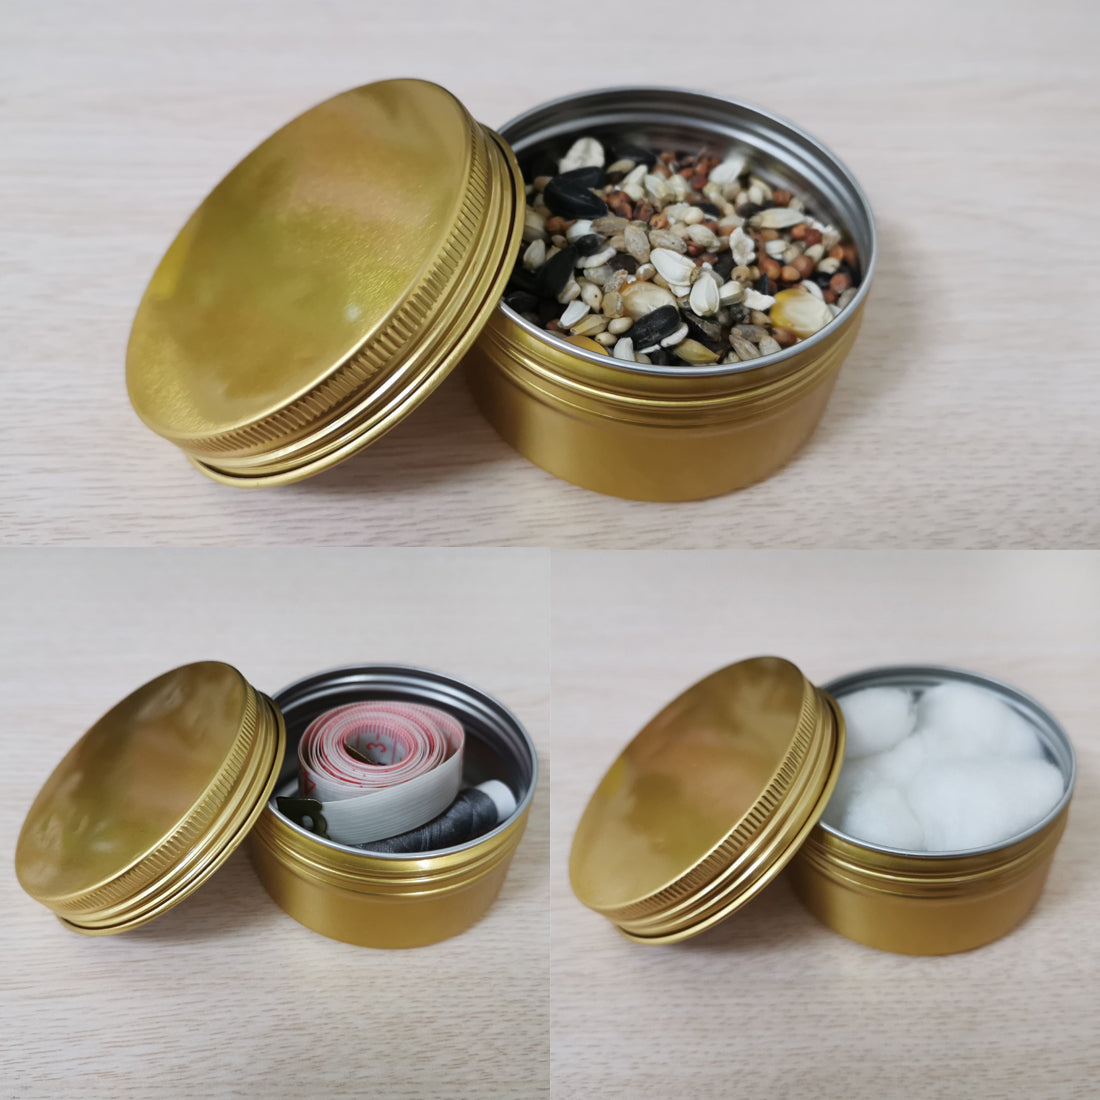 uxcell Uxcell 2.7oz Round Aluminum Cans Tin Screw Top Metal Lid Containers Gold Tone 80ml 3pcs